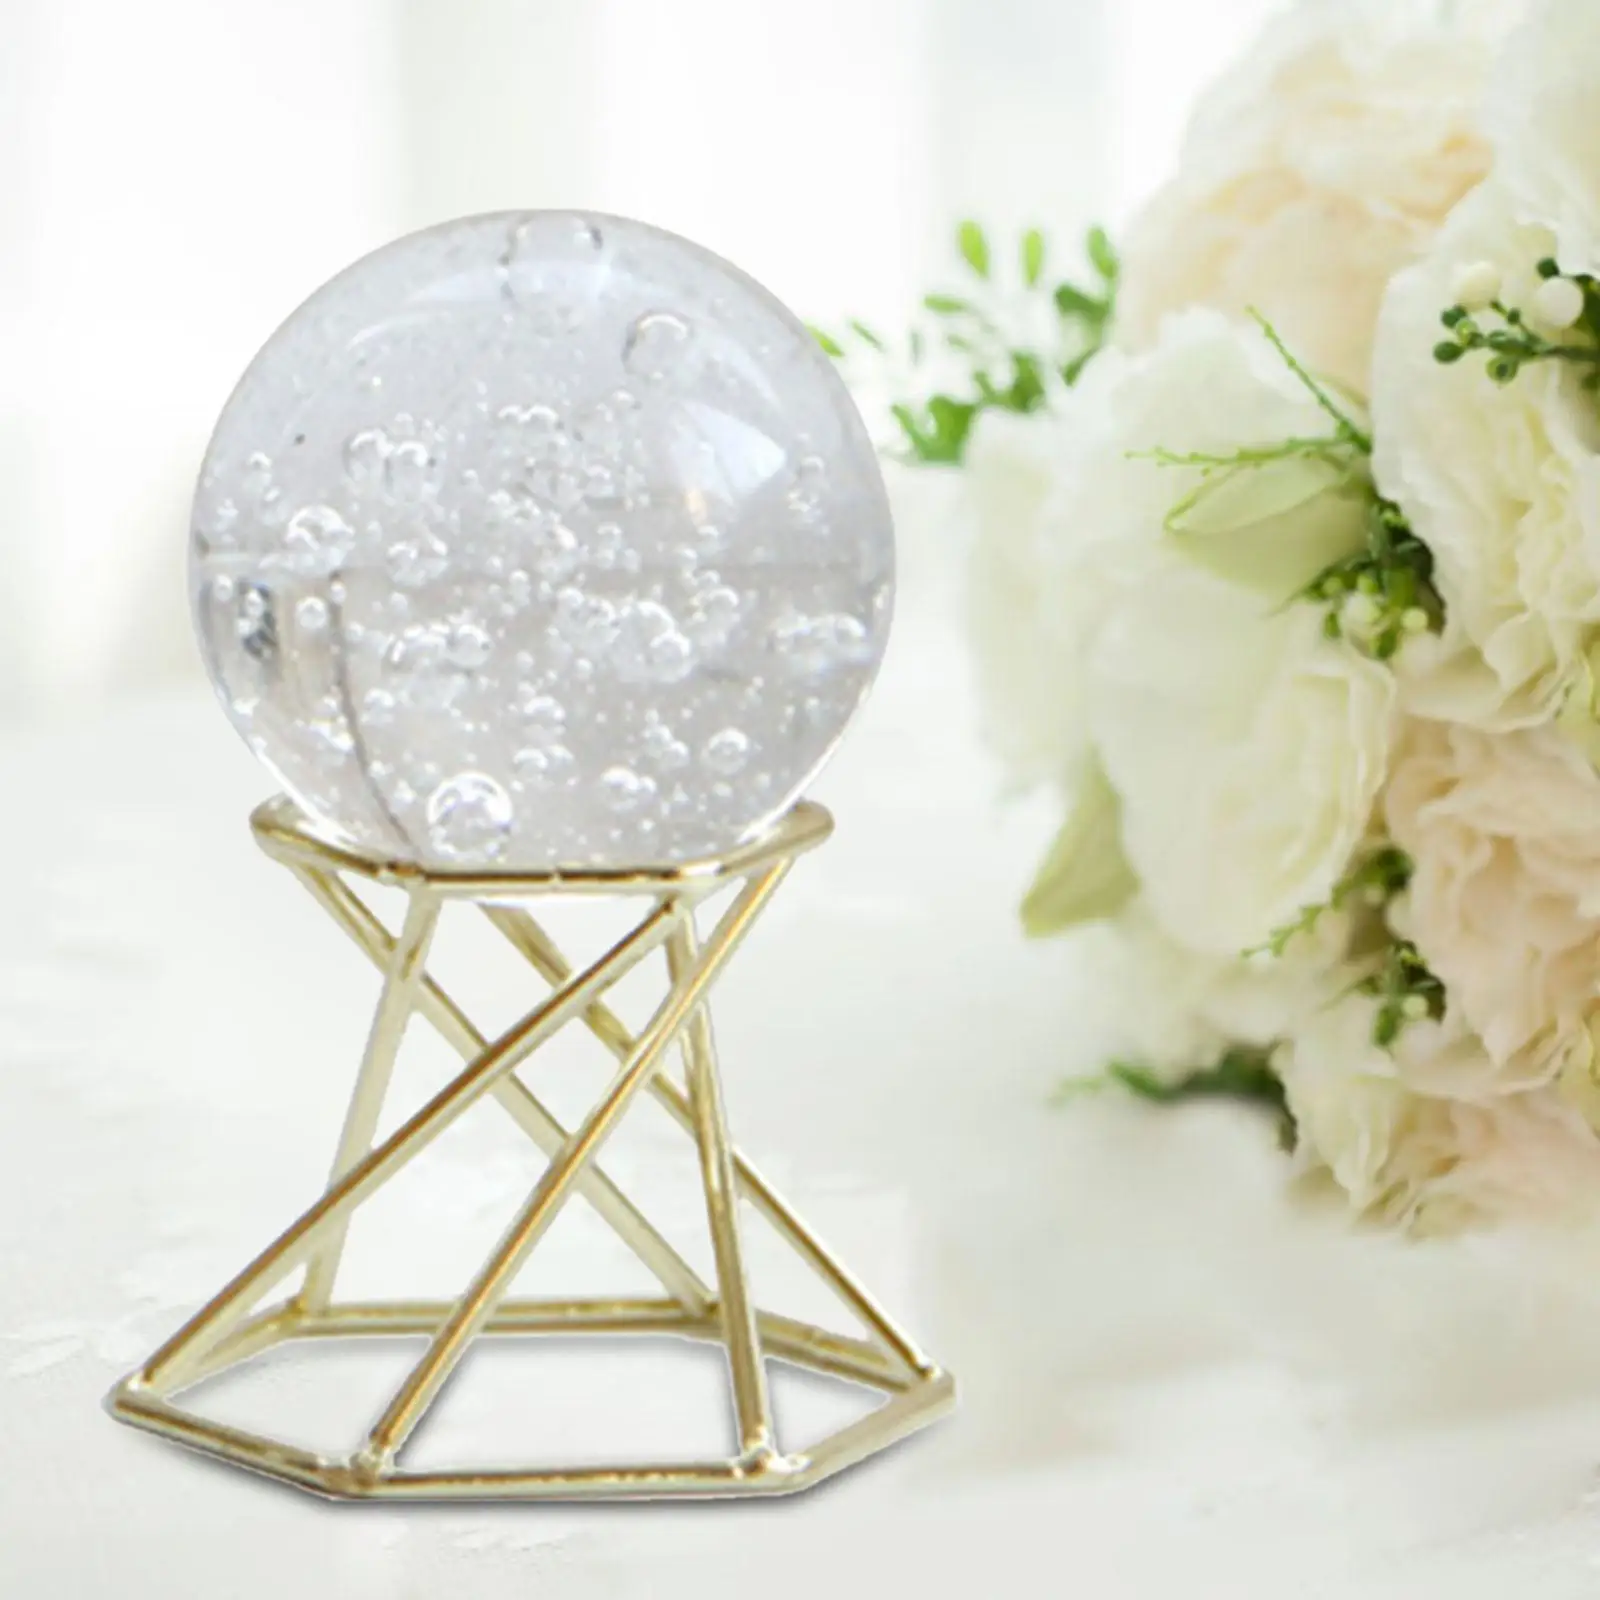 Decorative Ball with Display Stand Collection Craft Ball Holder for Desk Home Living Room Decor Gift